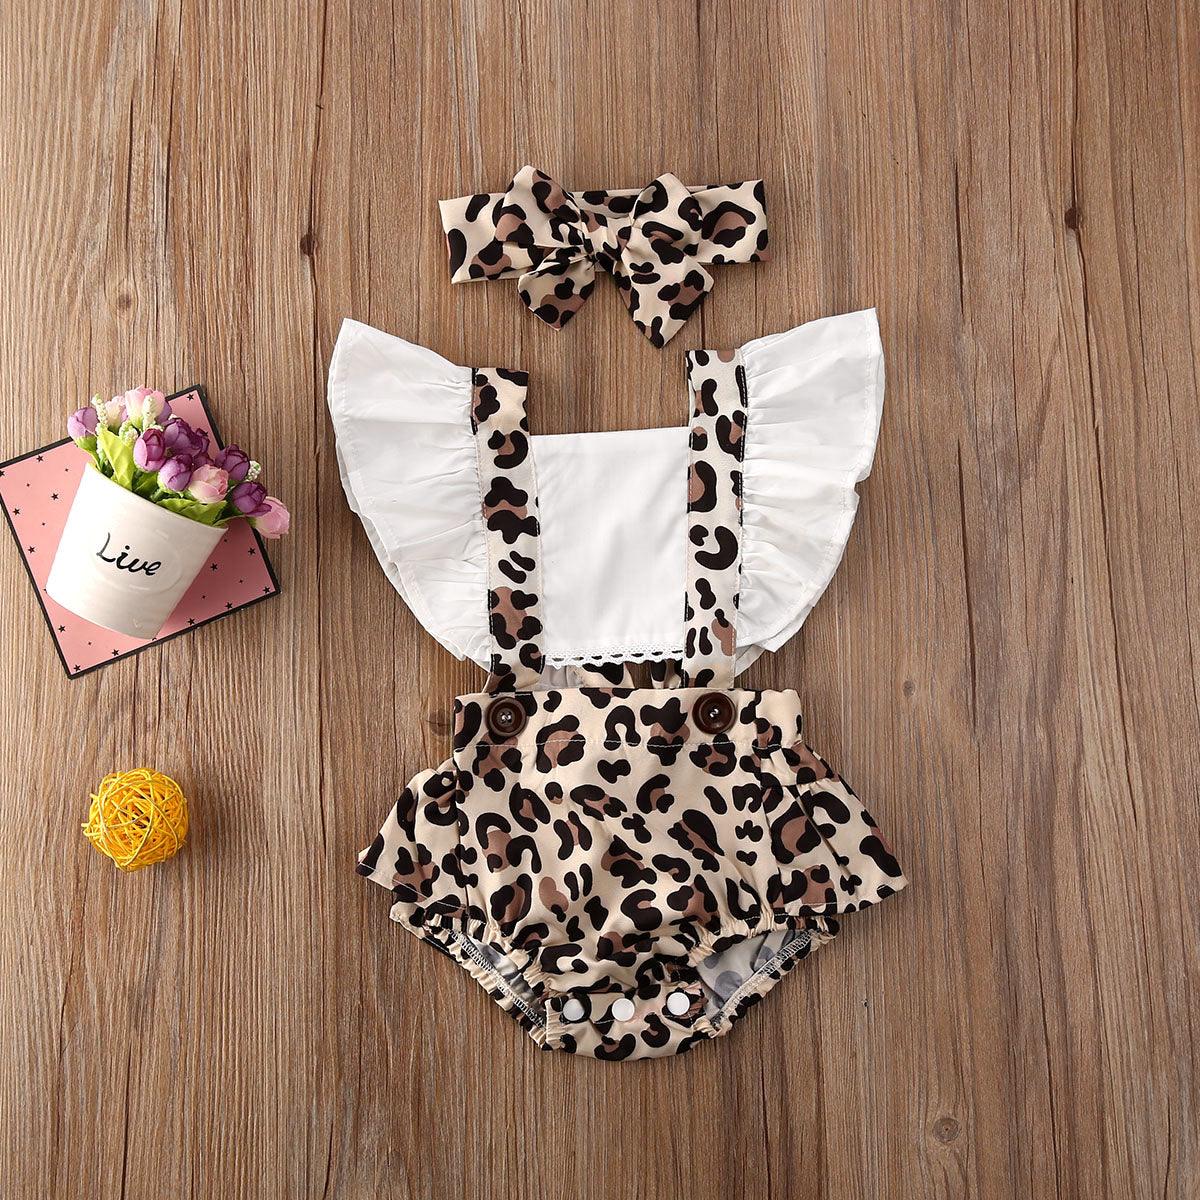 2 Pieces Infant Baby Girl Jumpsuit Clothes Outfits Cute Print 0-24M - HABASH FASHION